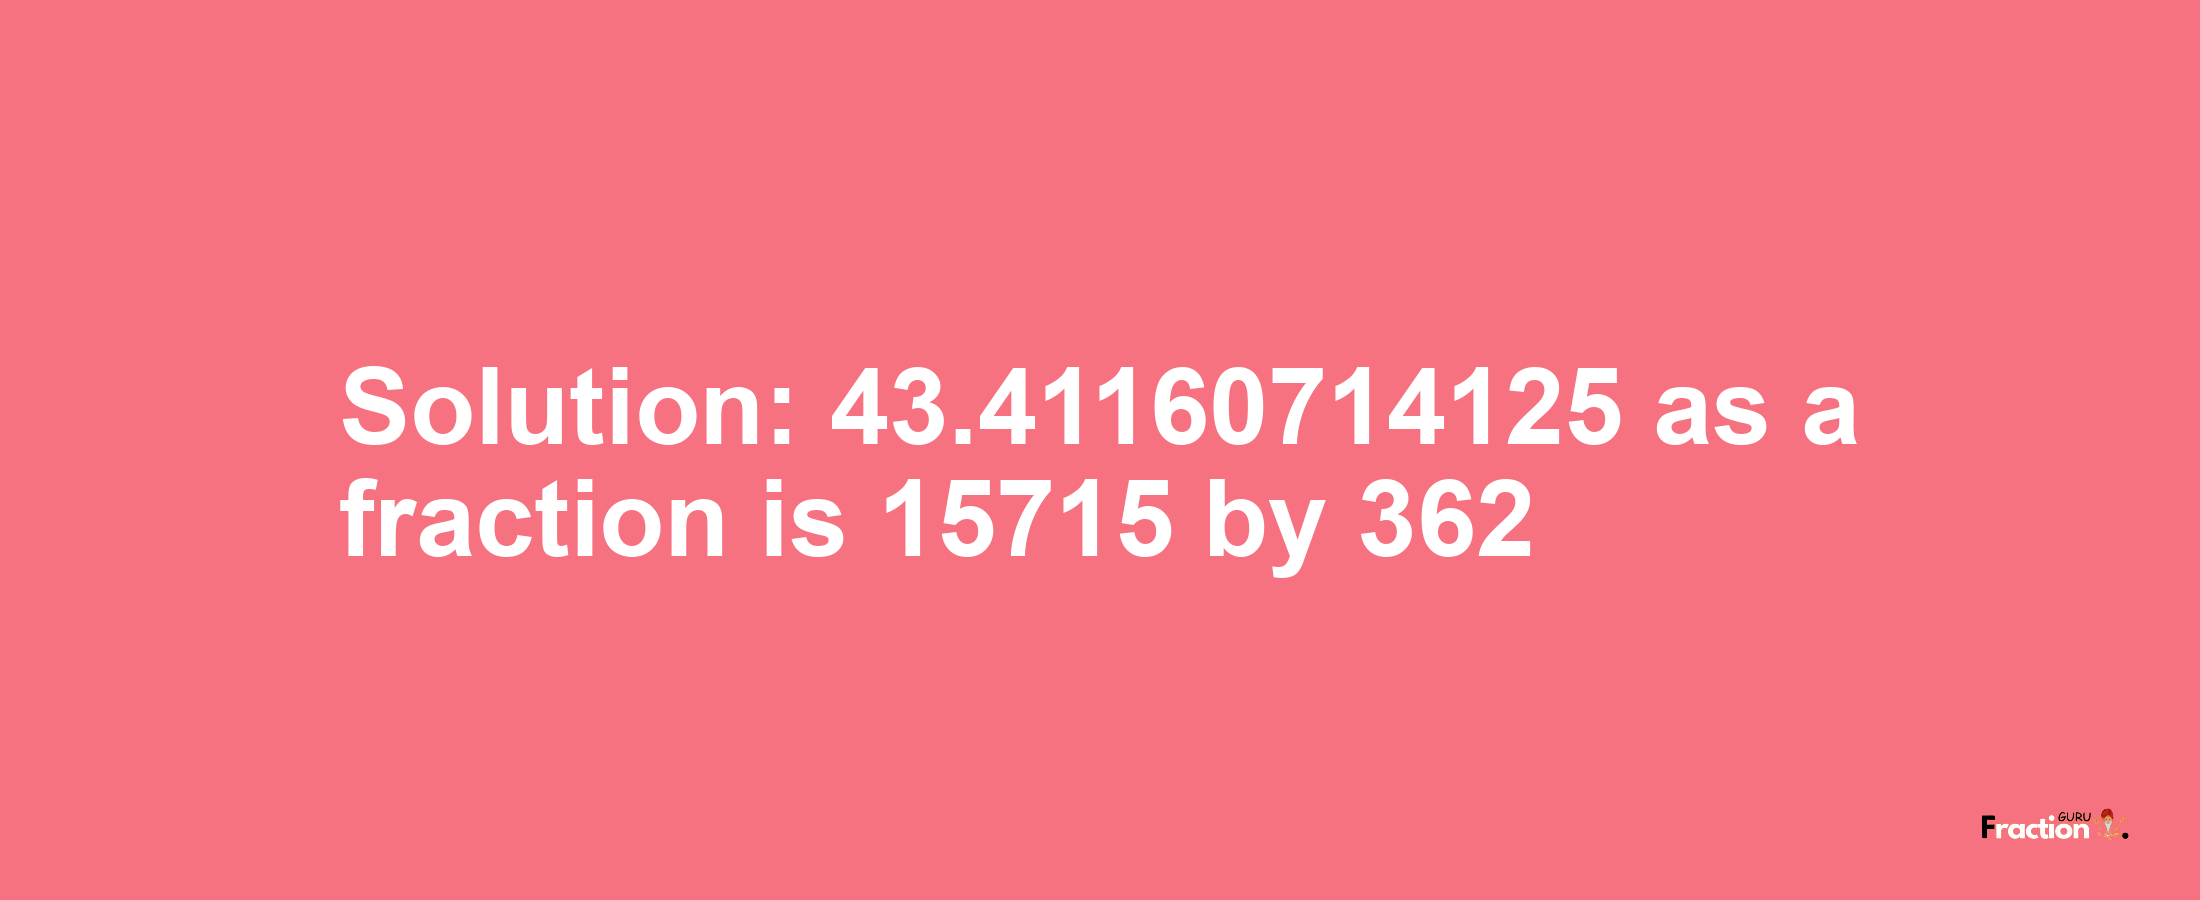 Solution:43.41160714125 as a fraction is 15715/362